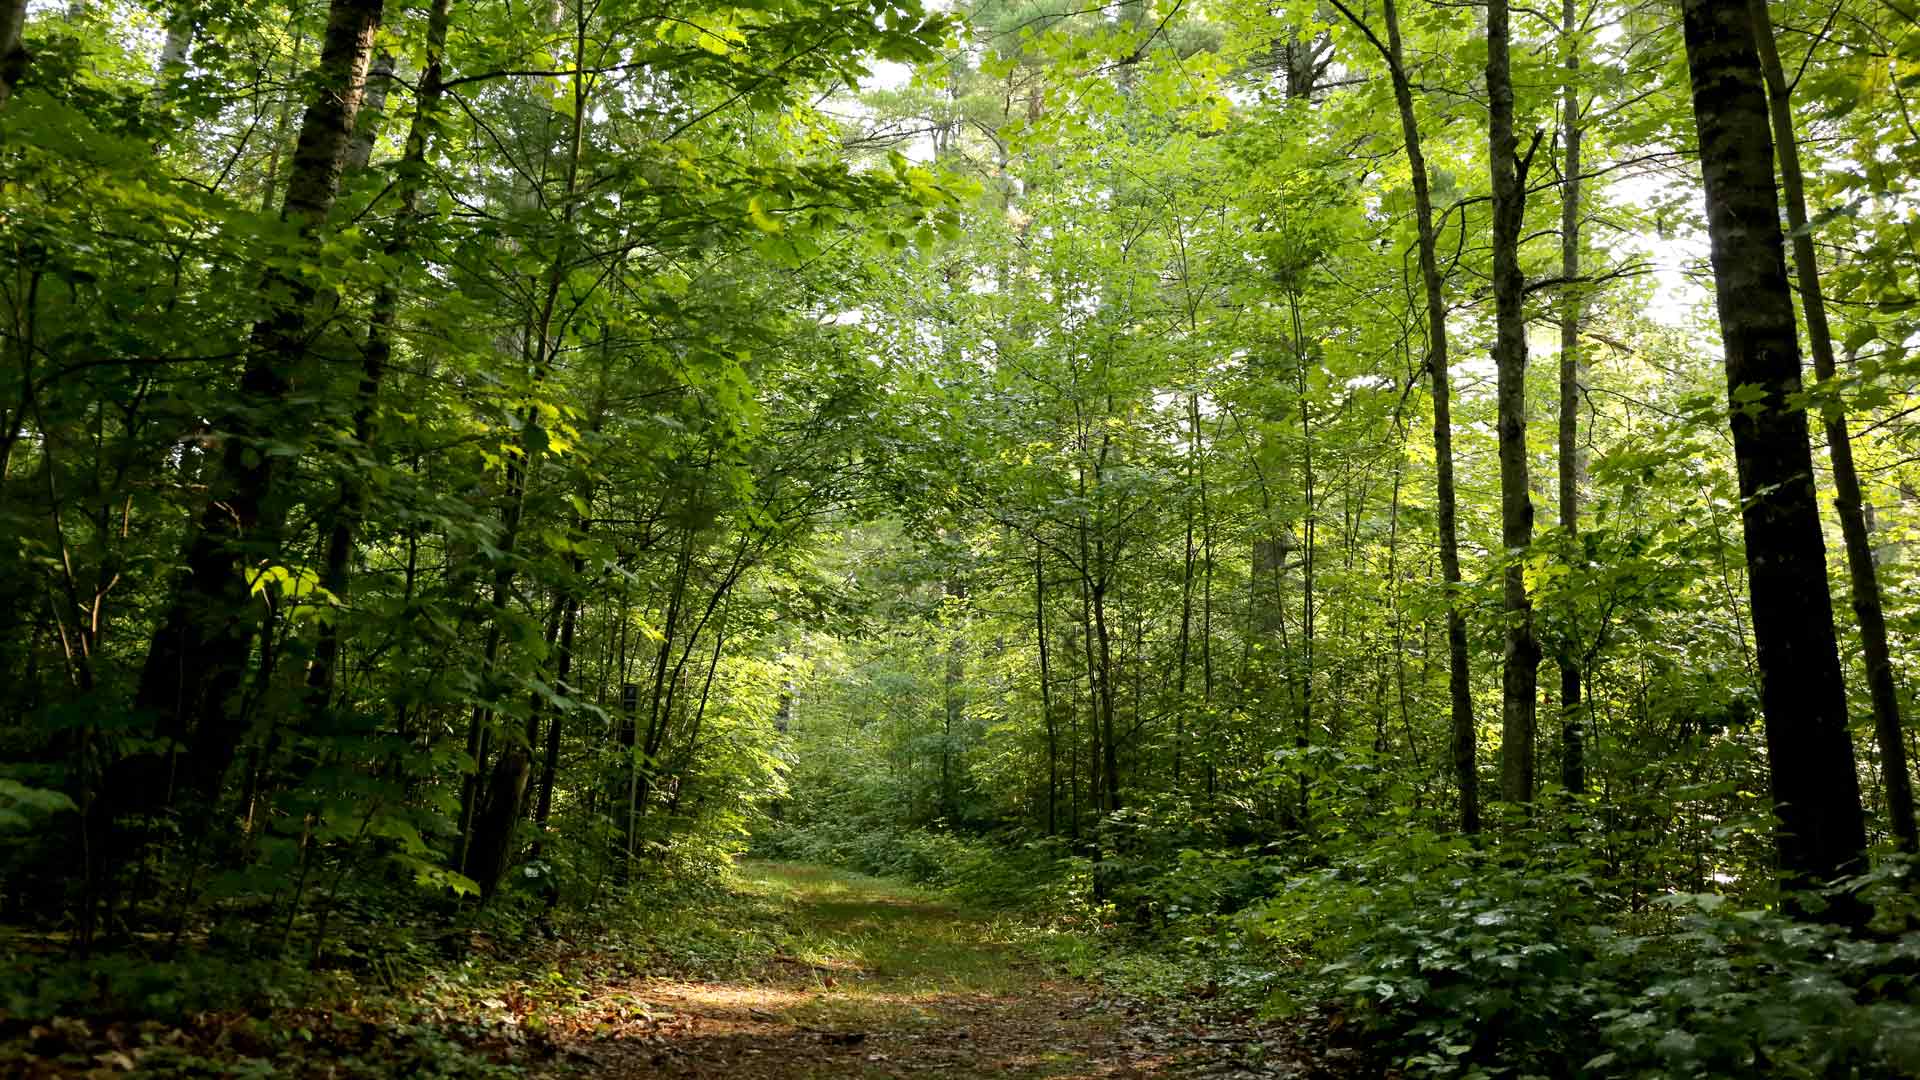 Path through lush green forest of the Lumberjack Trail in Vilas County, Wisconsin